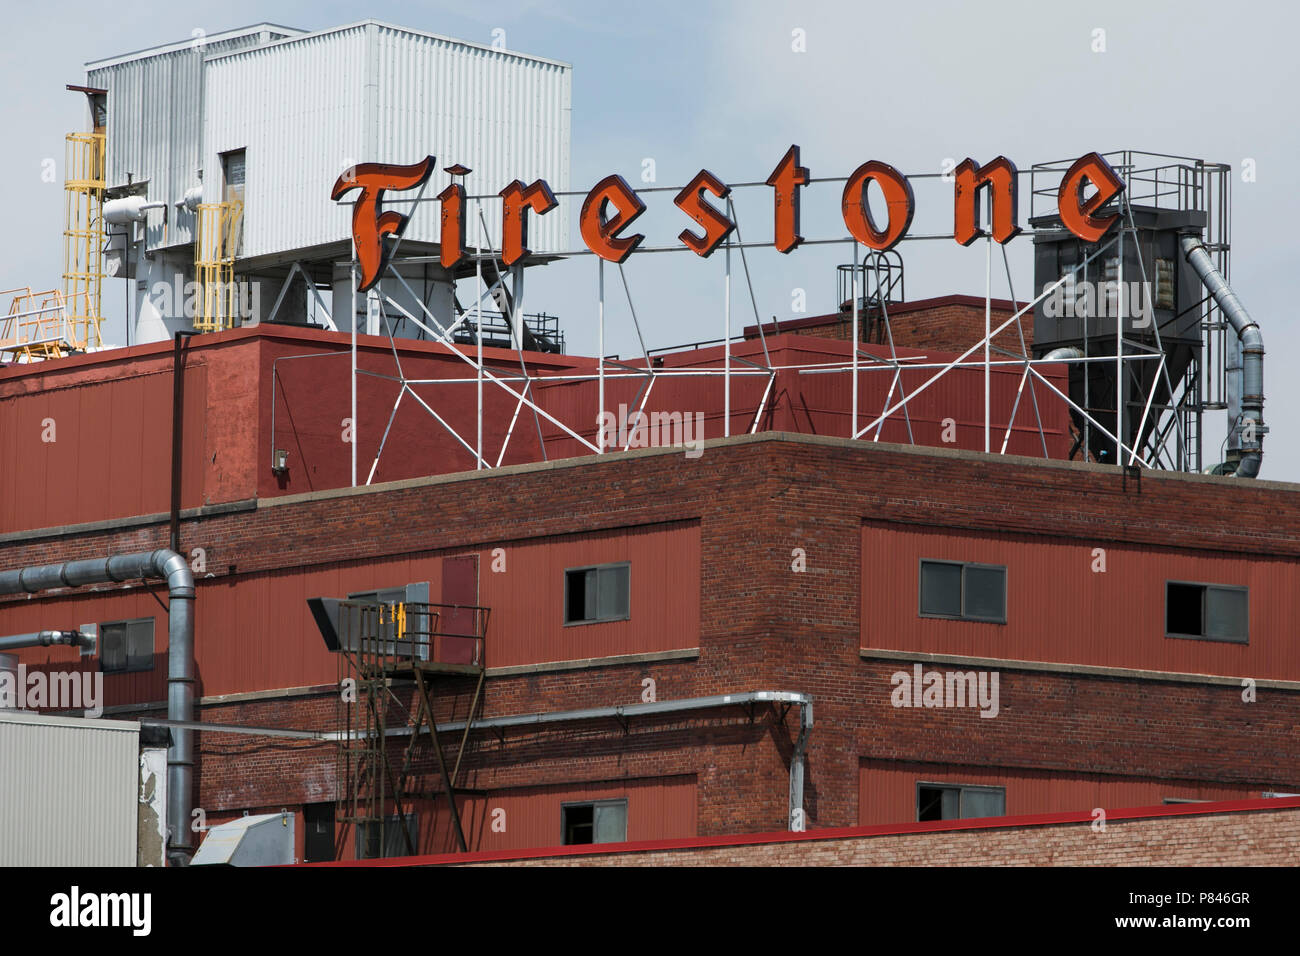 A logo sign outside of the Bridgestone Firestone agricultural tire plant in Des Moines, Iowa, on June 30, 2018. Stock Photo